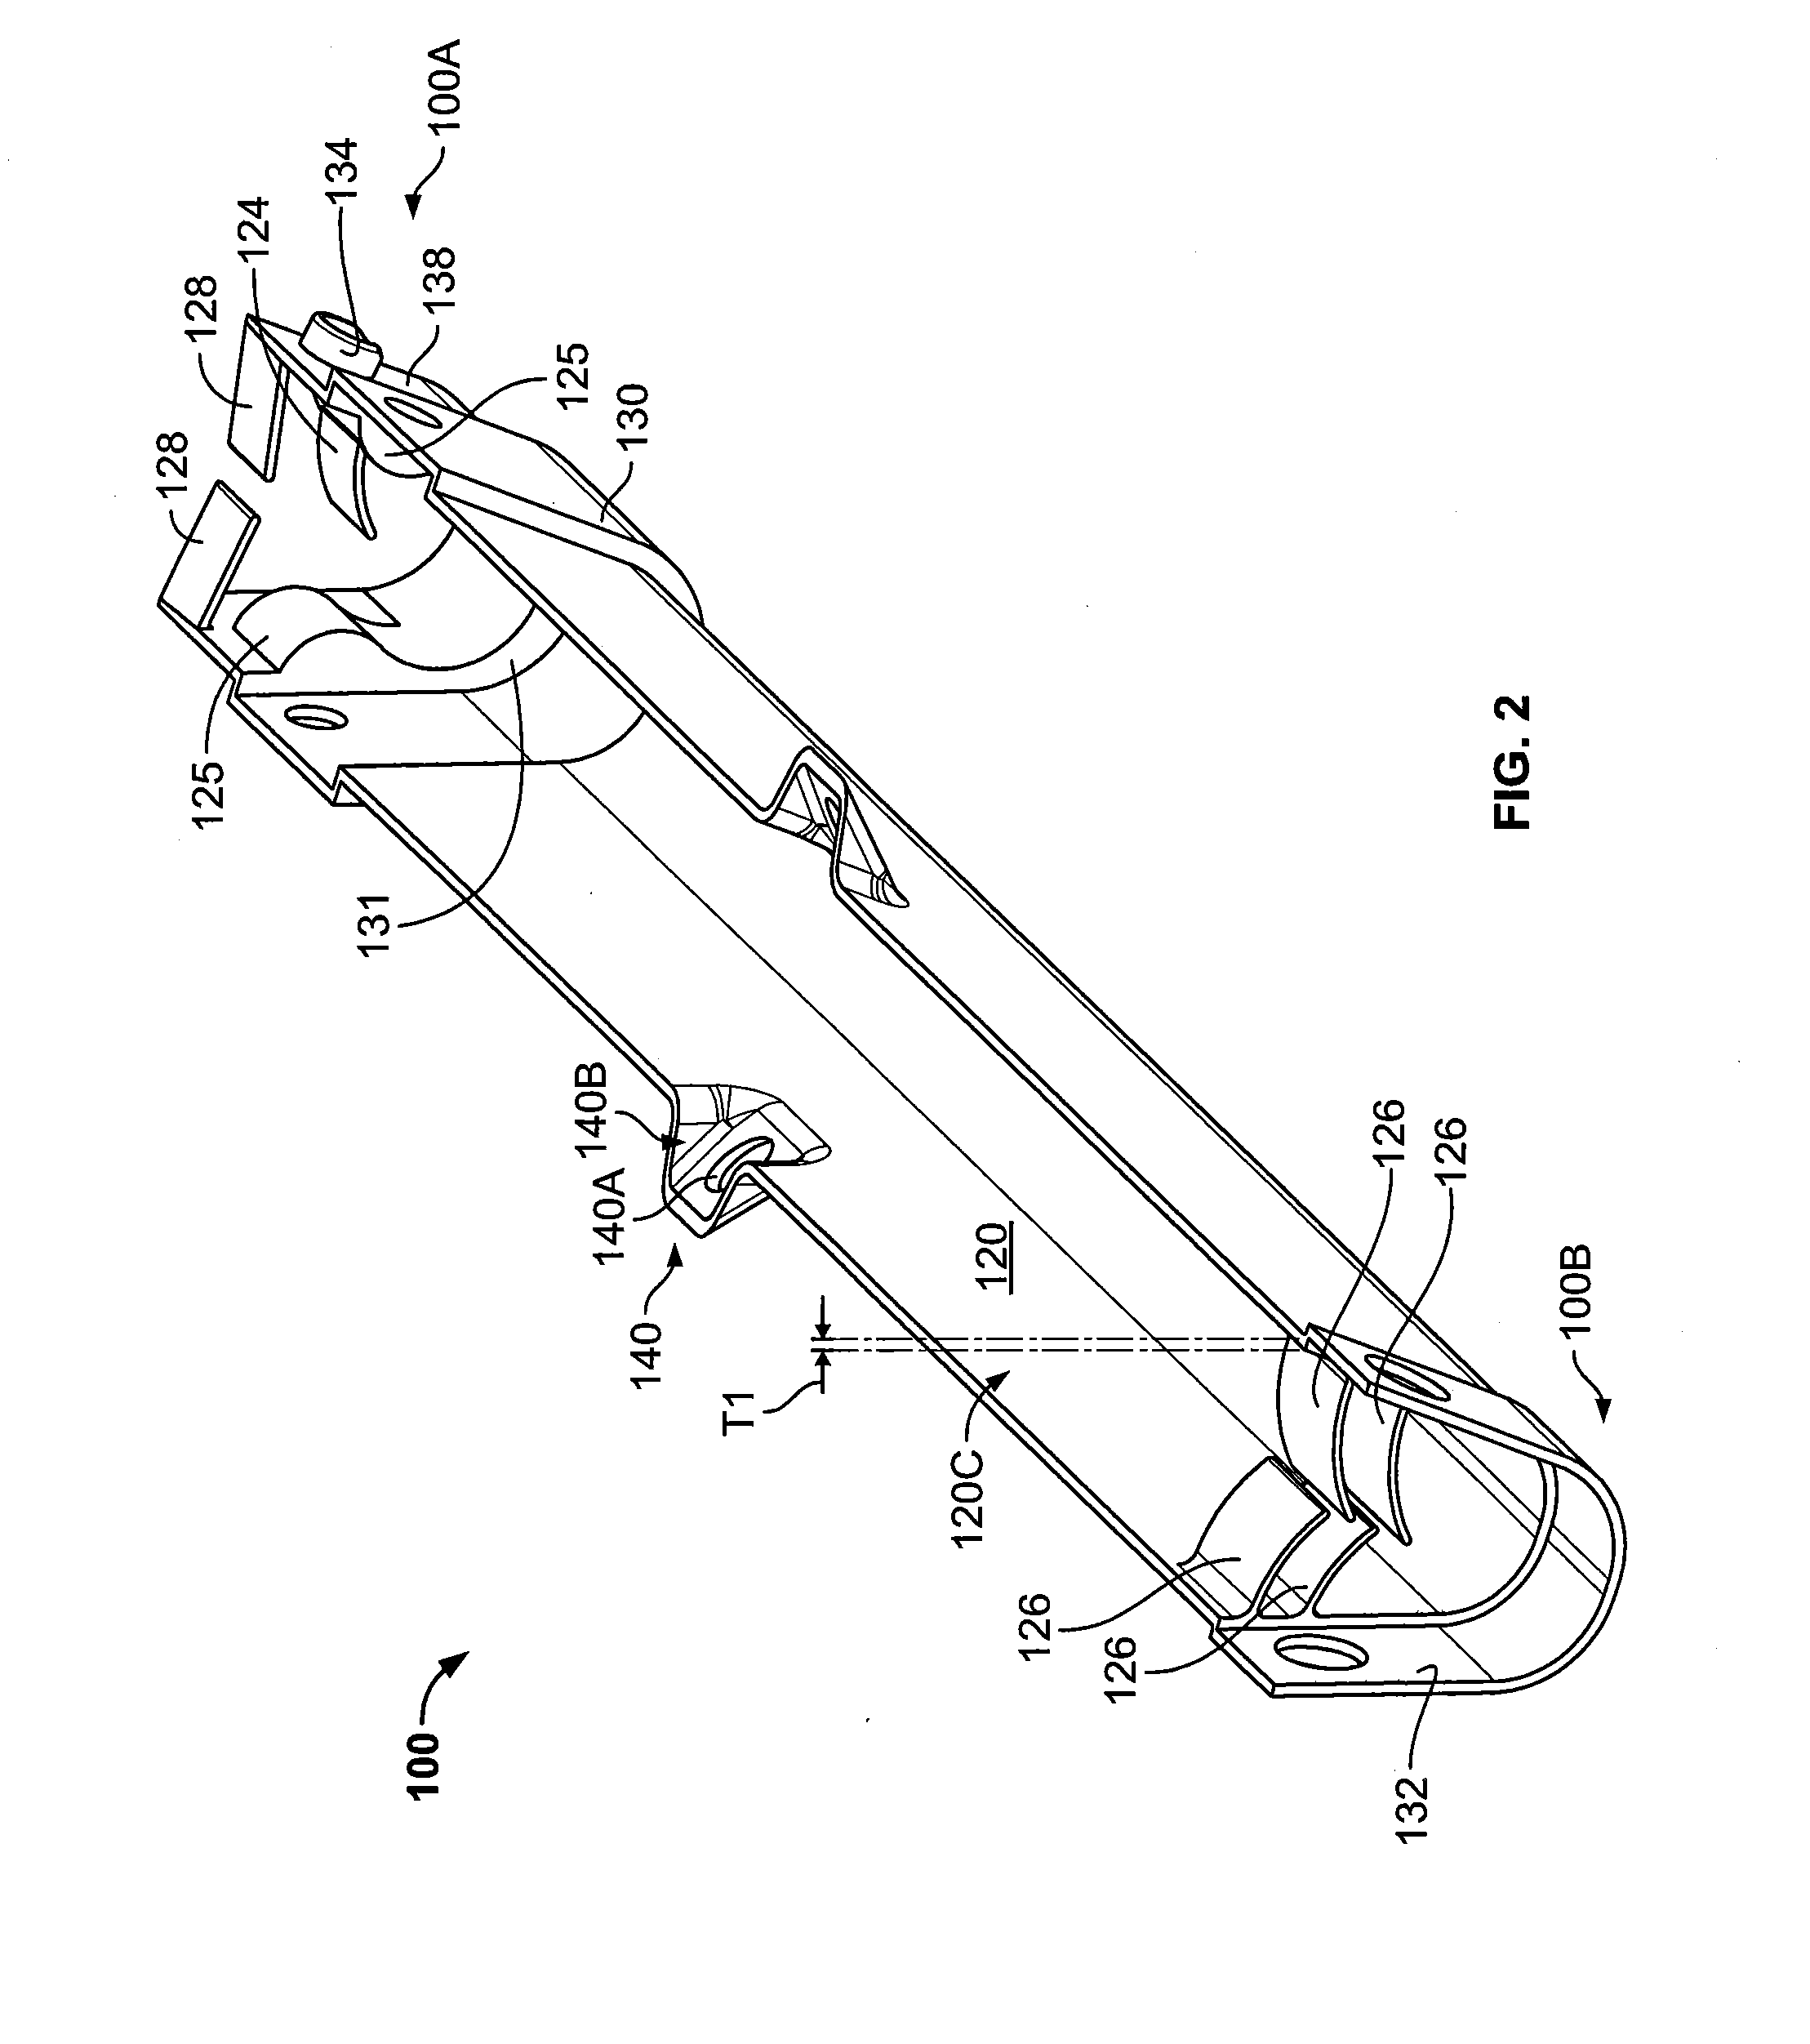 Covers for electrical distribution lines and insulators and methods and systems including same